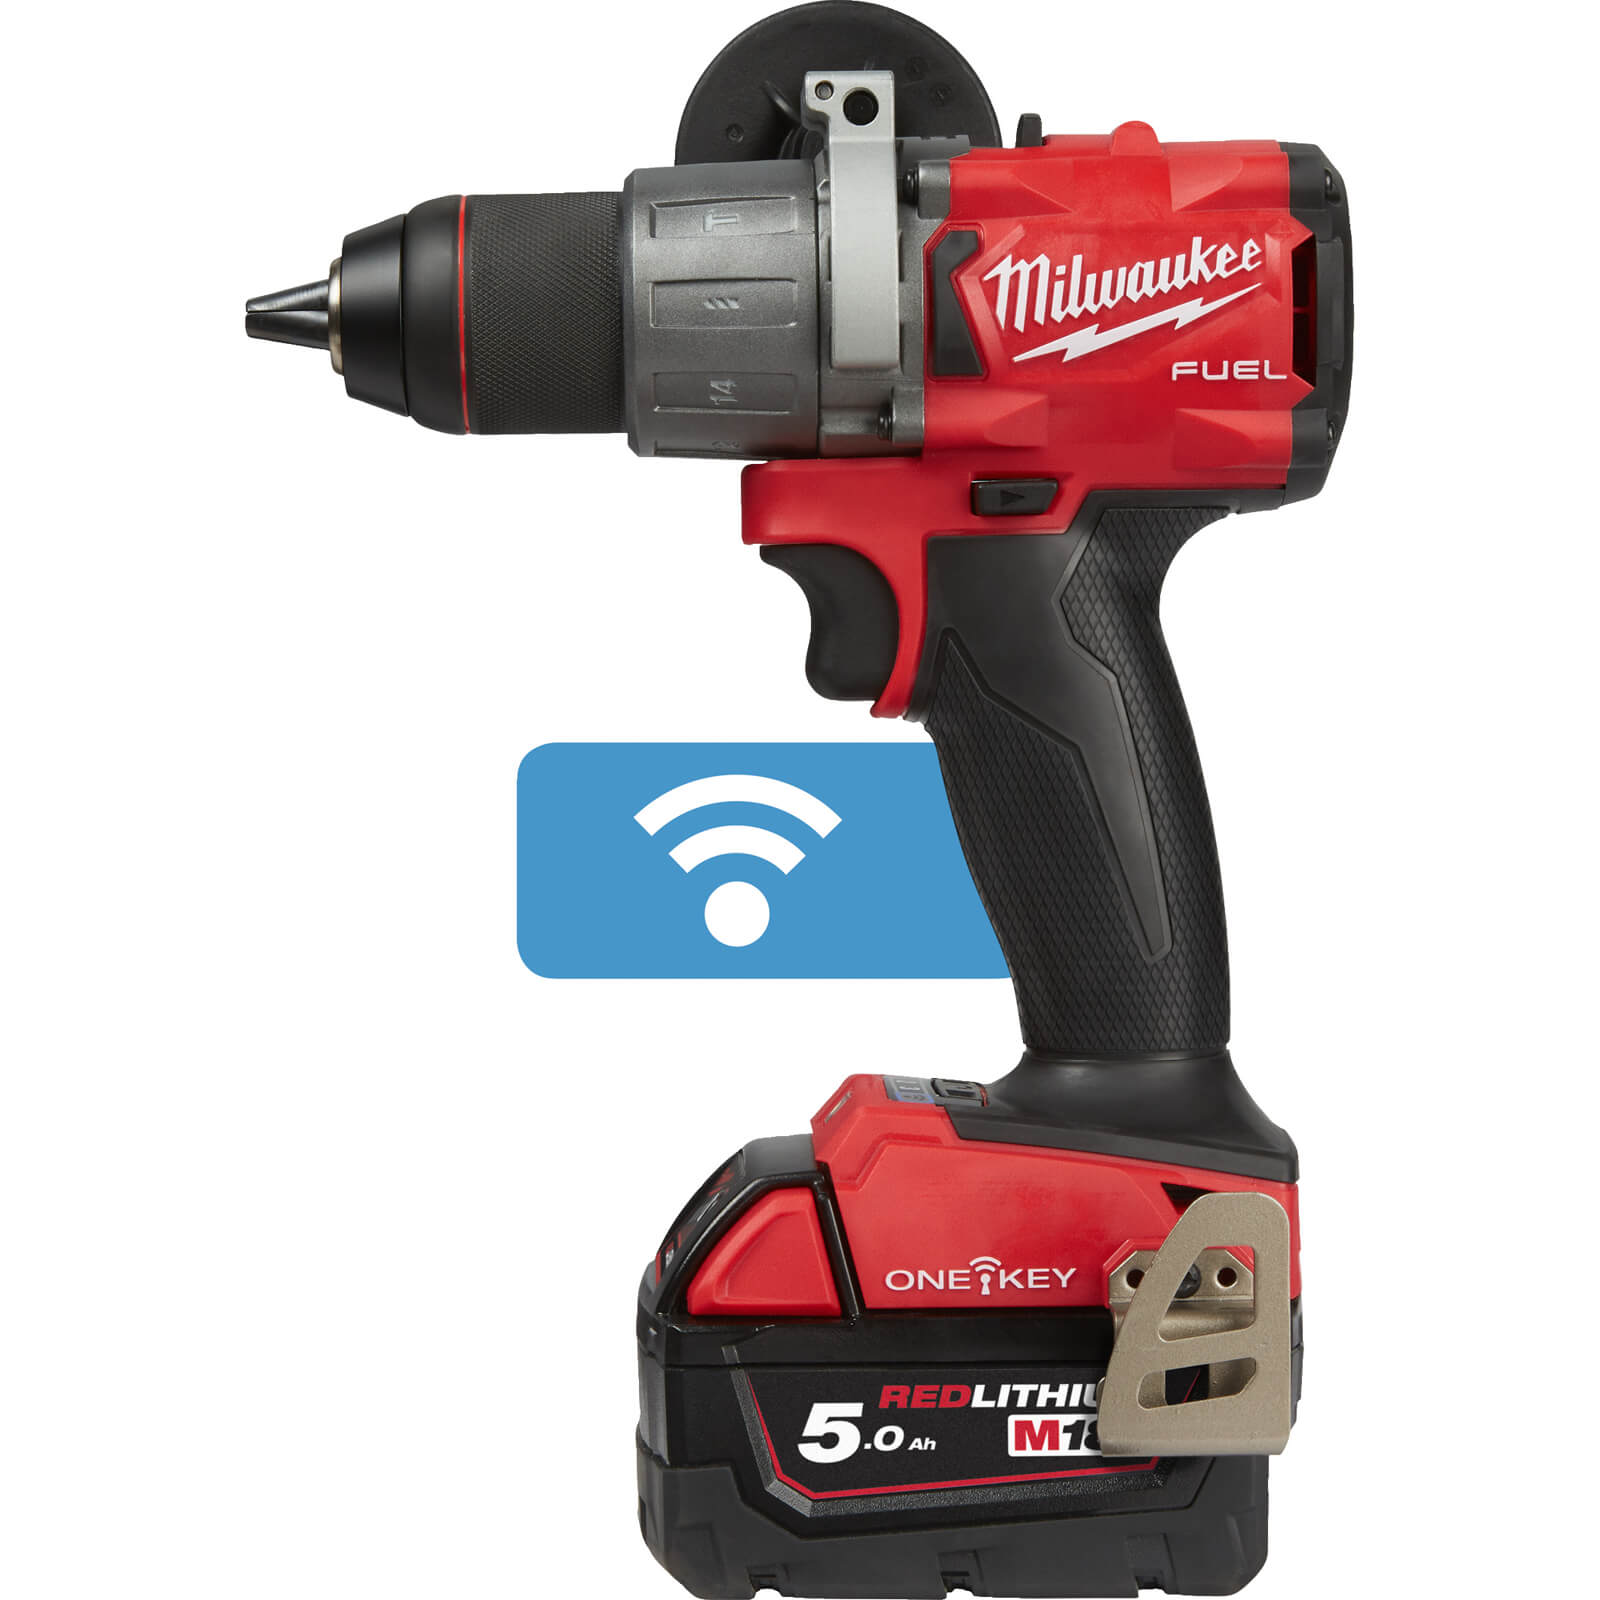 Milwaukee M18 ONEPD2 Fuel 18v Cordless Brushless Combi Drill 2 x 5ah Li-ion Charger Case